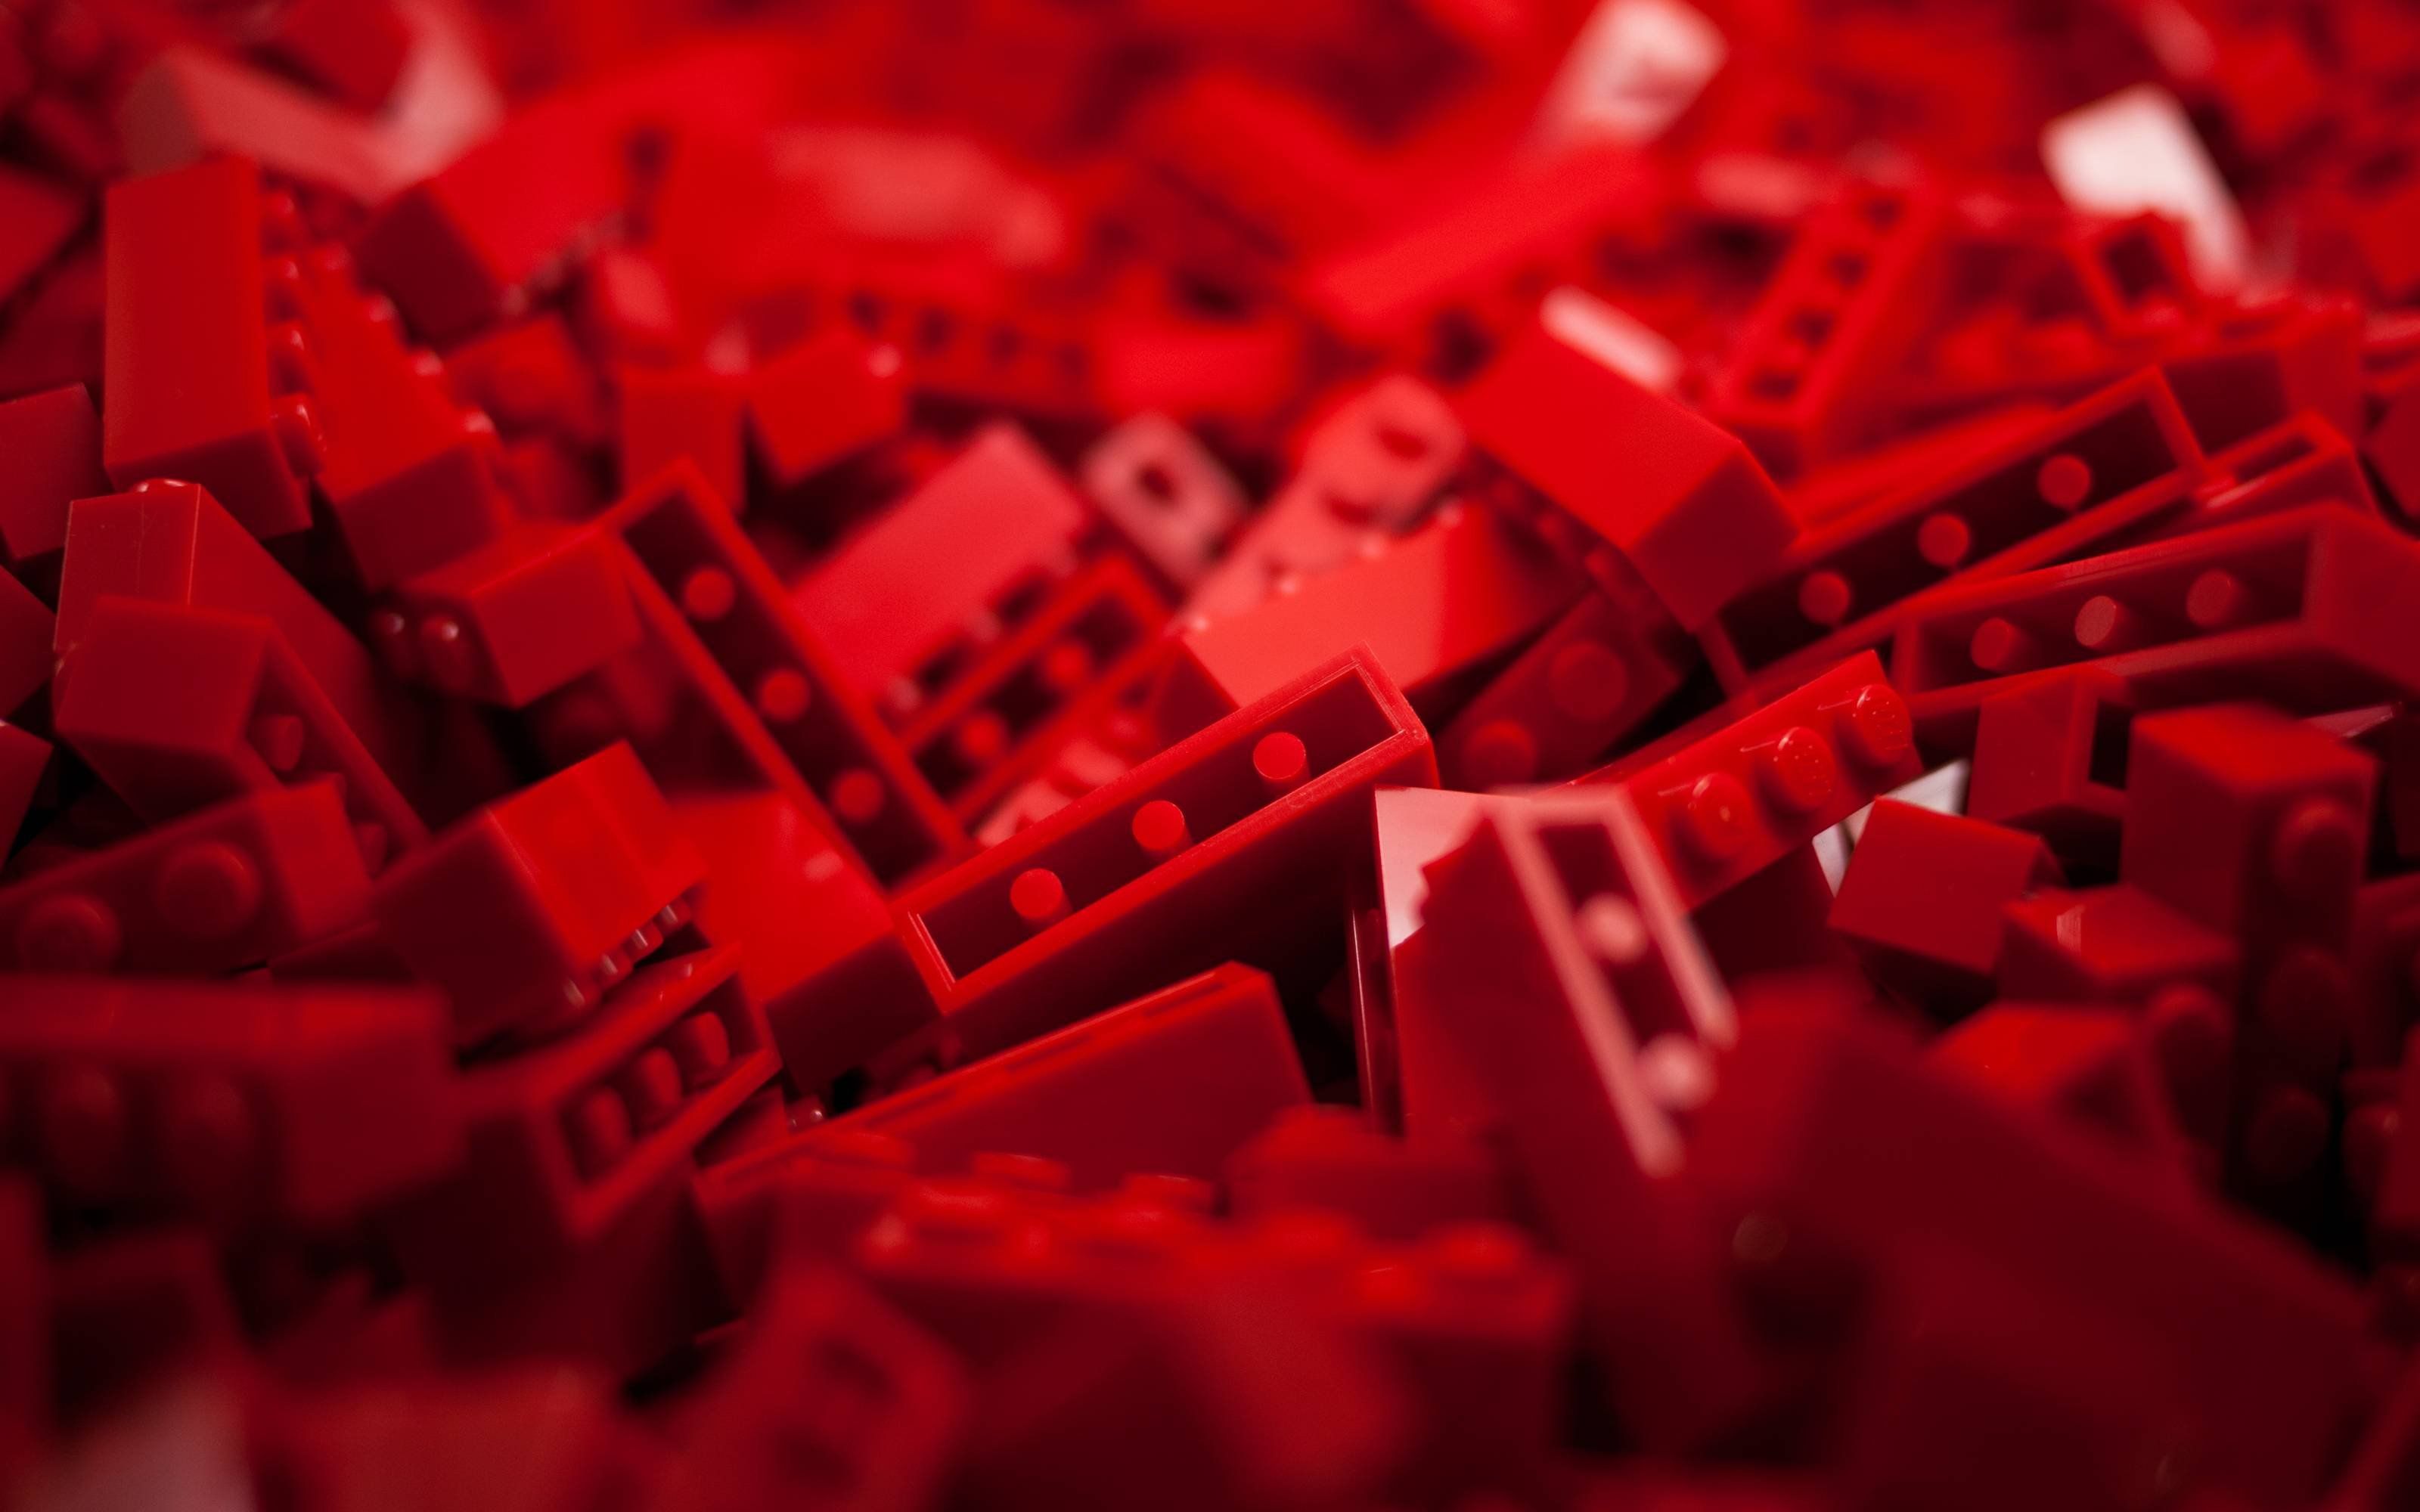 Lego 4K wallpaper for your desktop or mobile screen free and easy to download